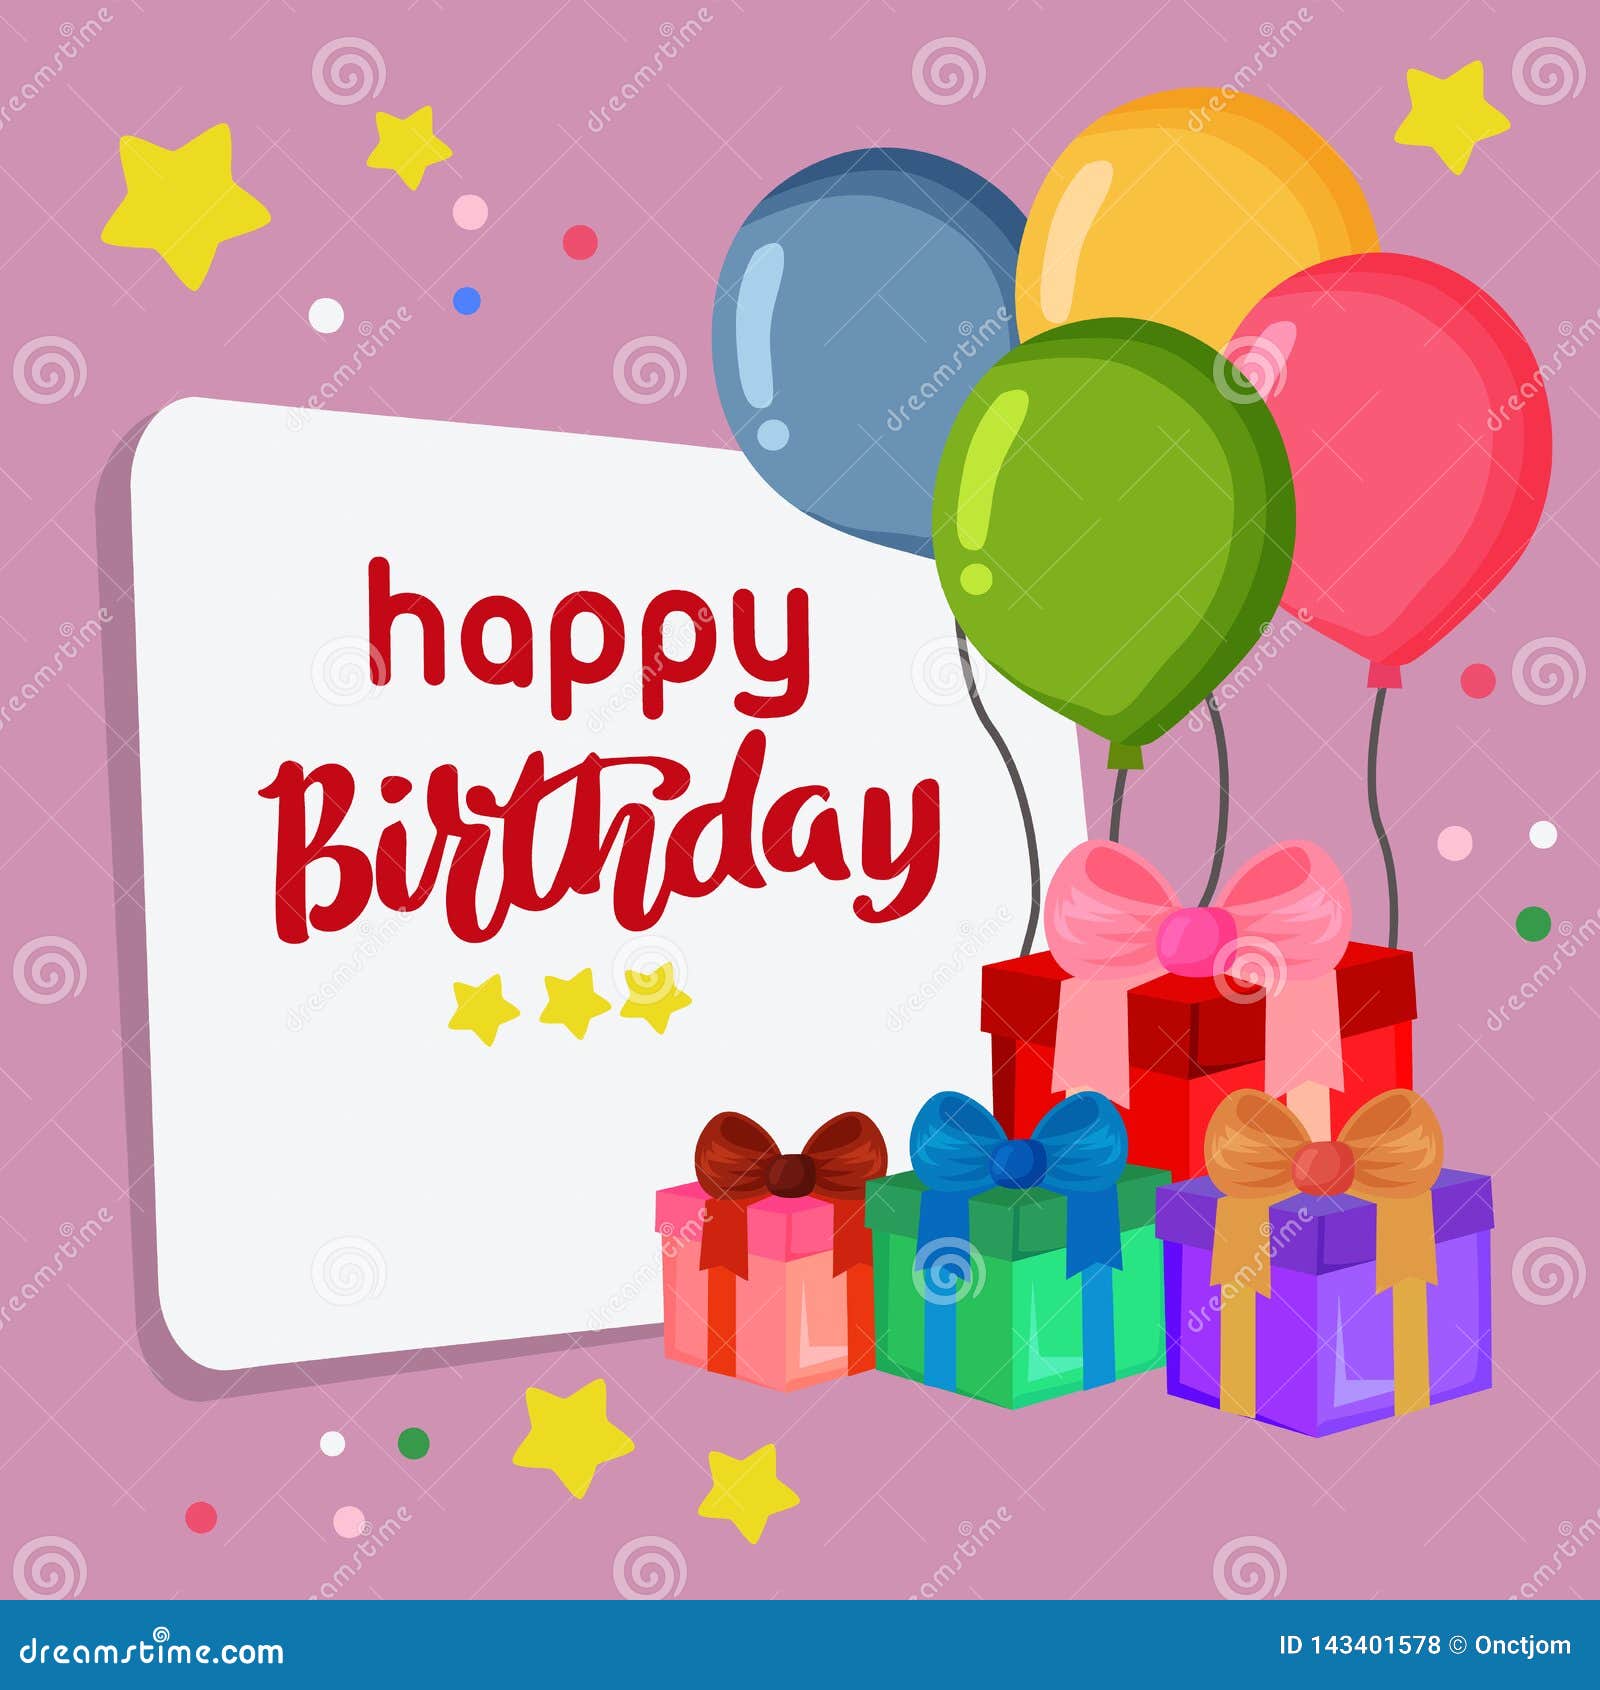 Cute Happy Birthday Present Gift with Balloon Stock Vector ...